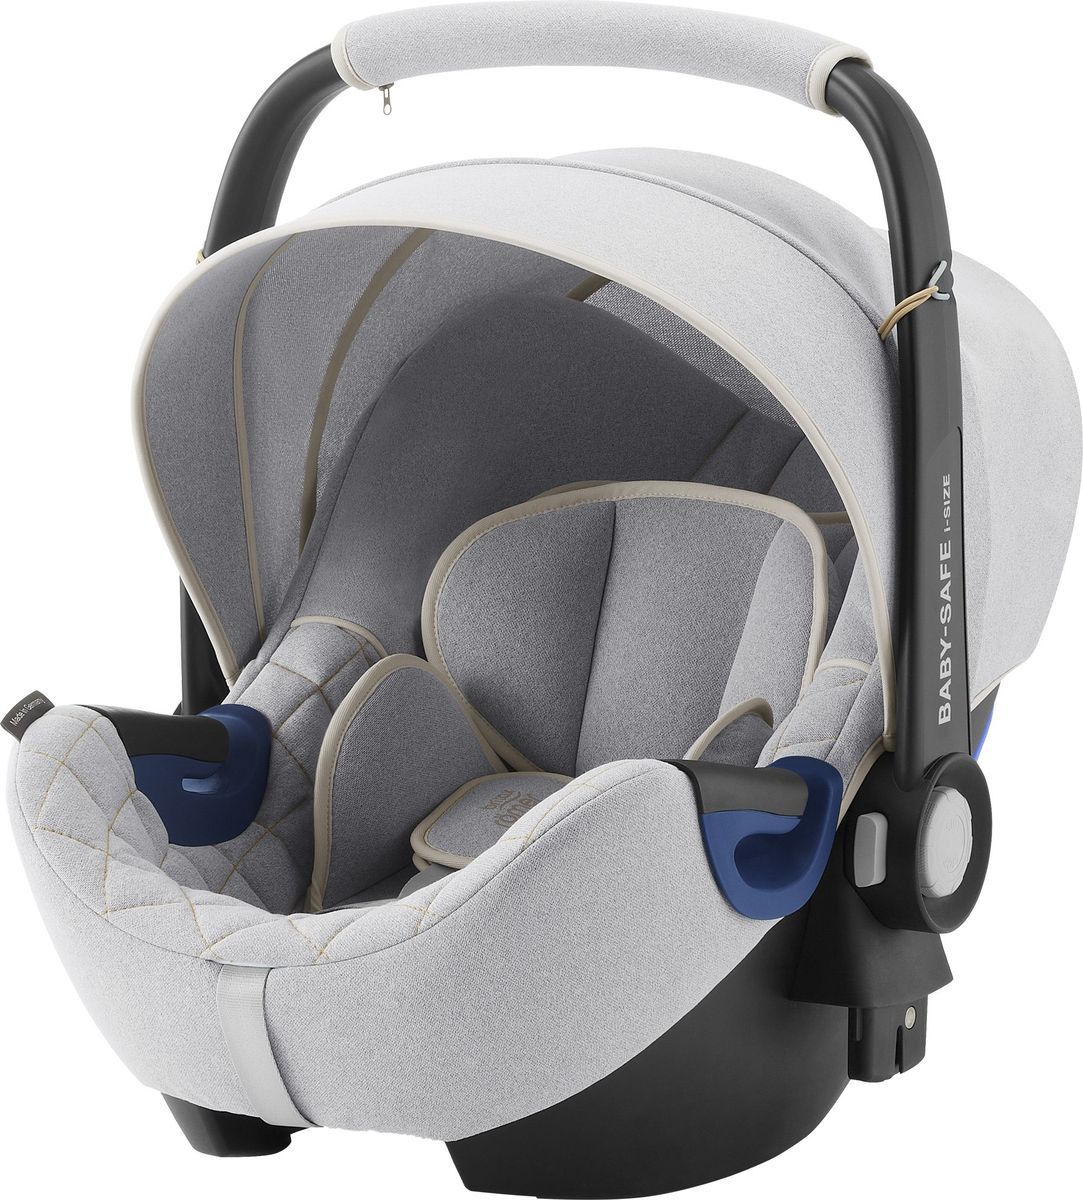  Britax Roemer Baby-Safe2 i-Size Nordic Grey, 2000029120,  13 